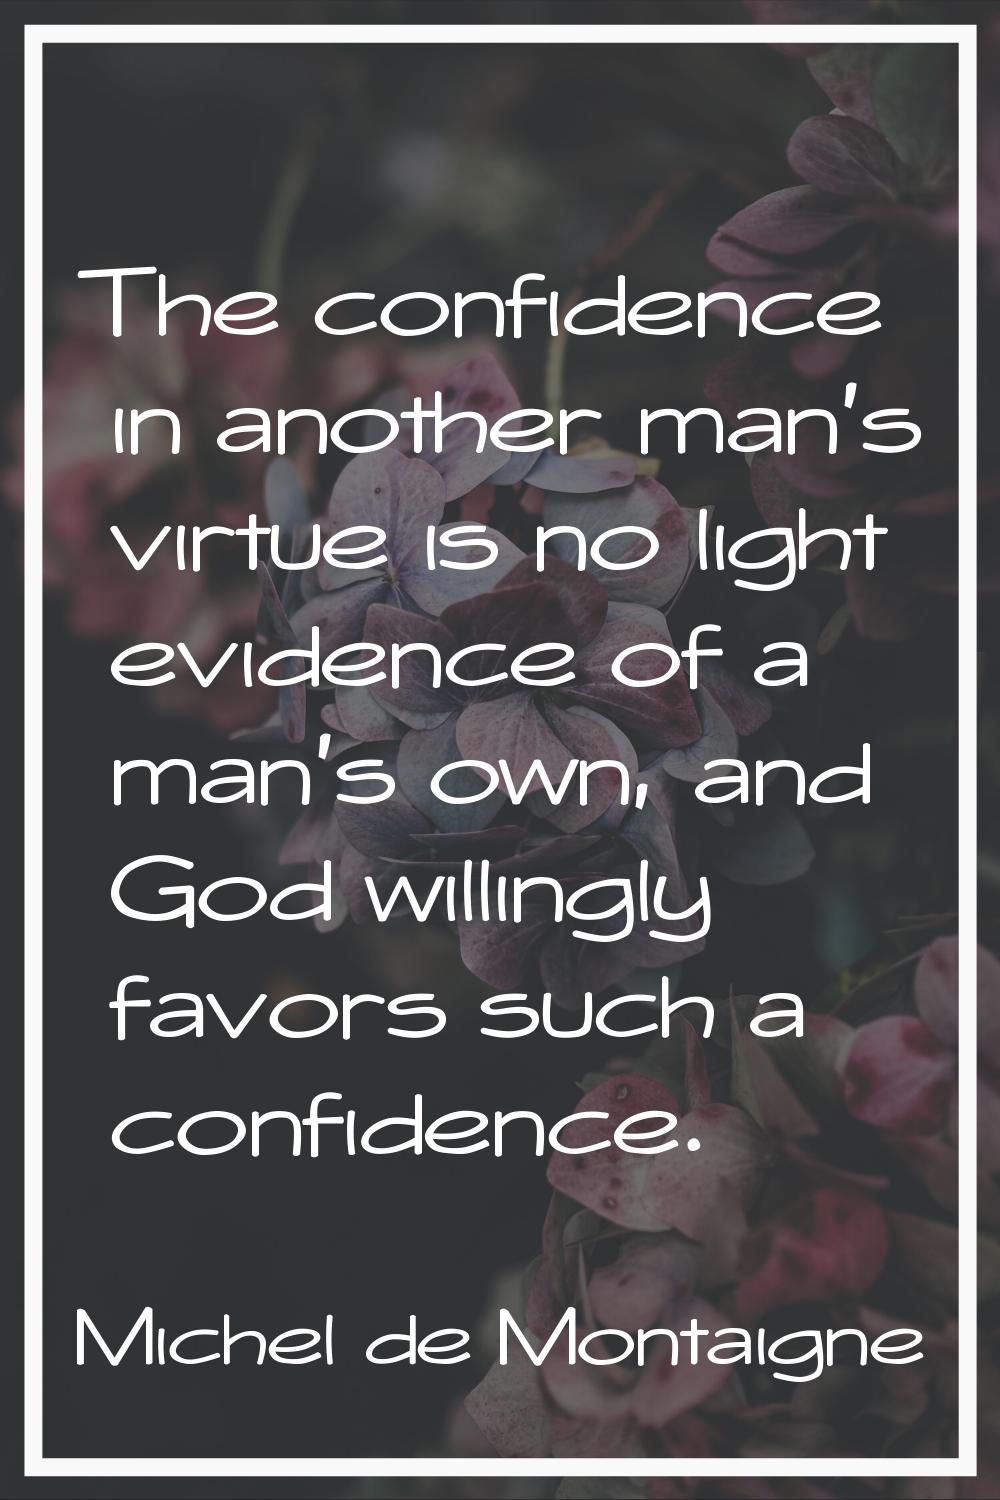 The confidence in another man's virtue is no light evidence of a man's own, and God willingly favor